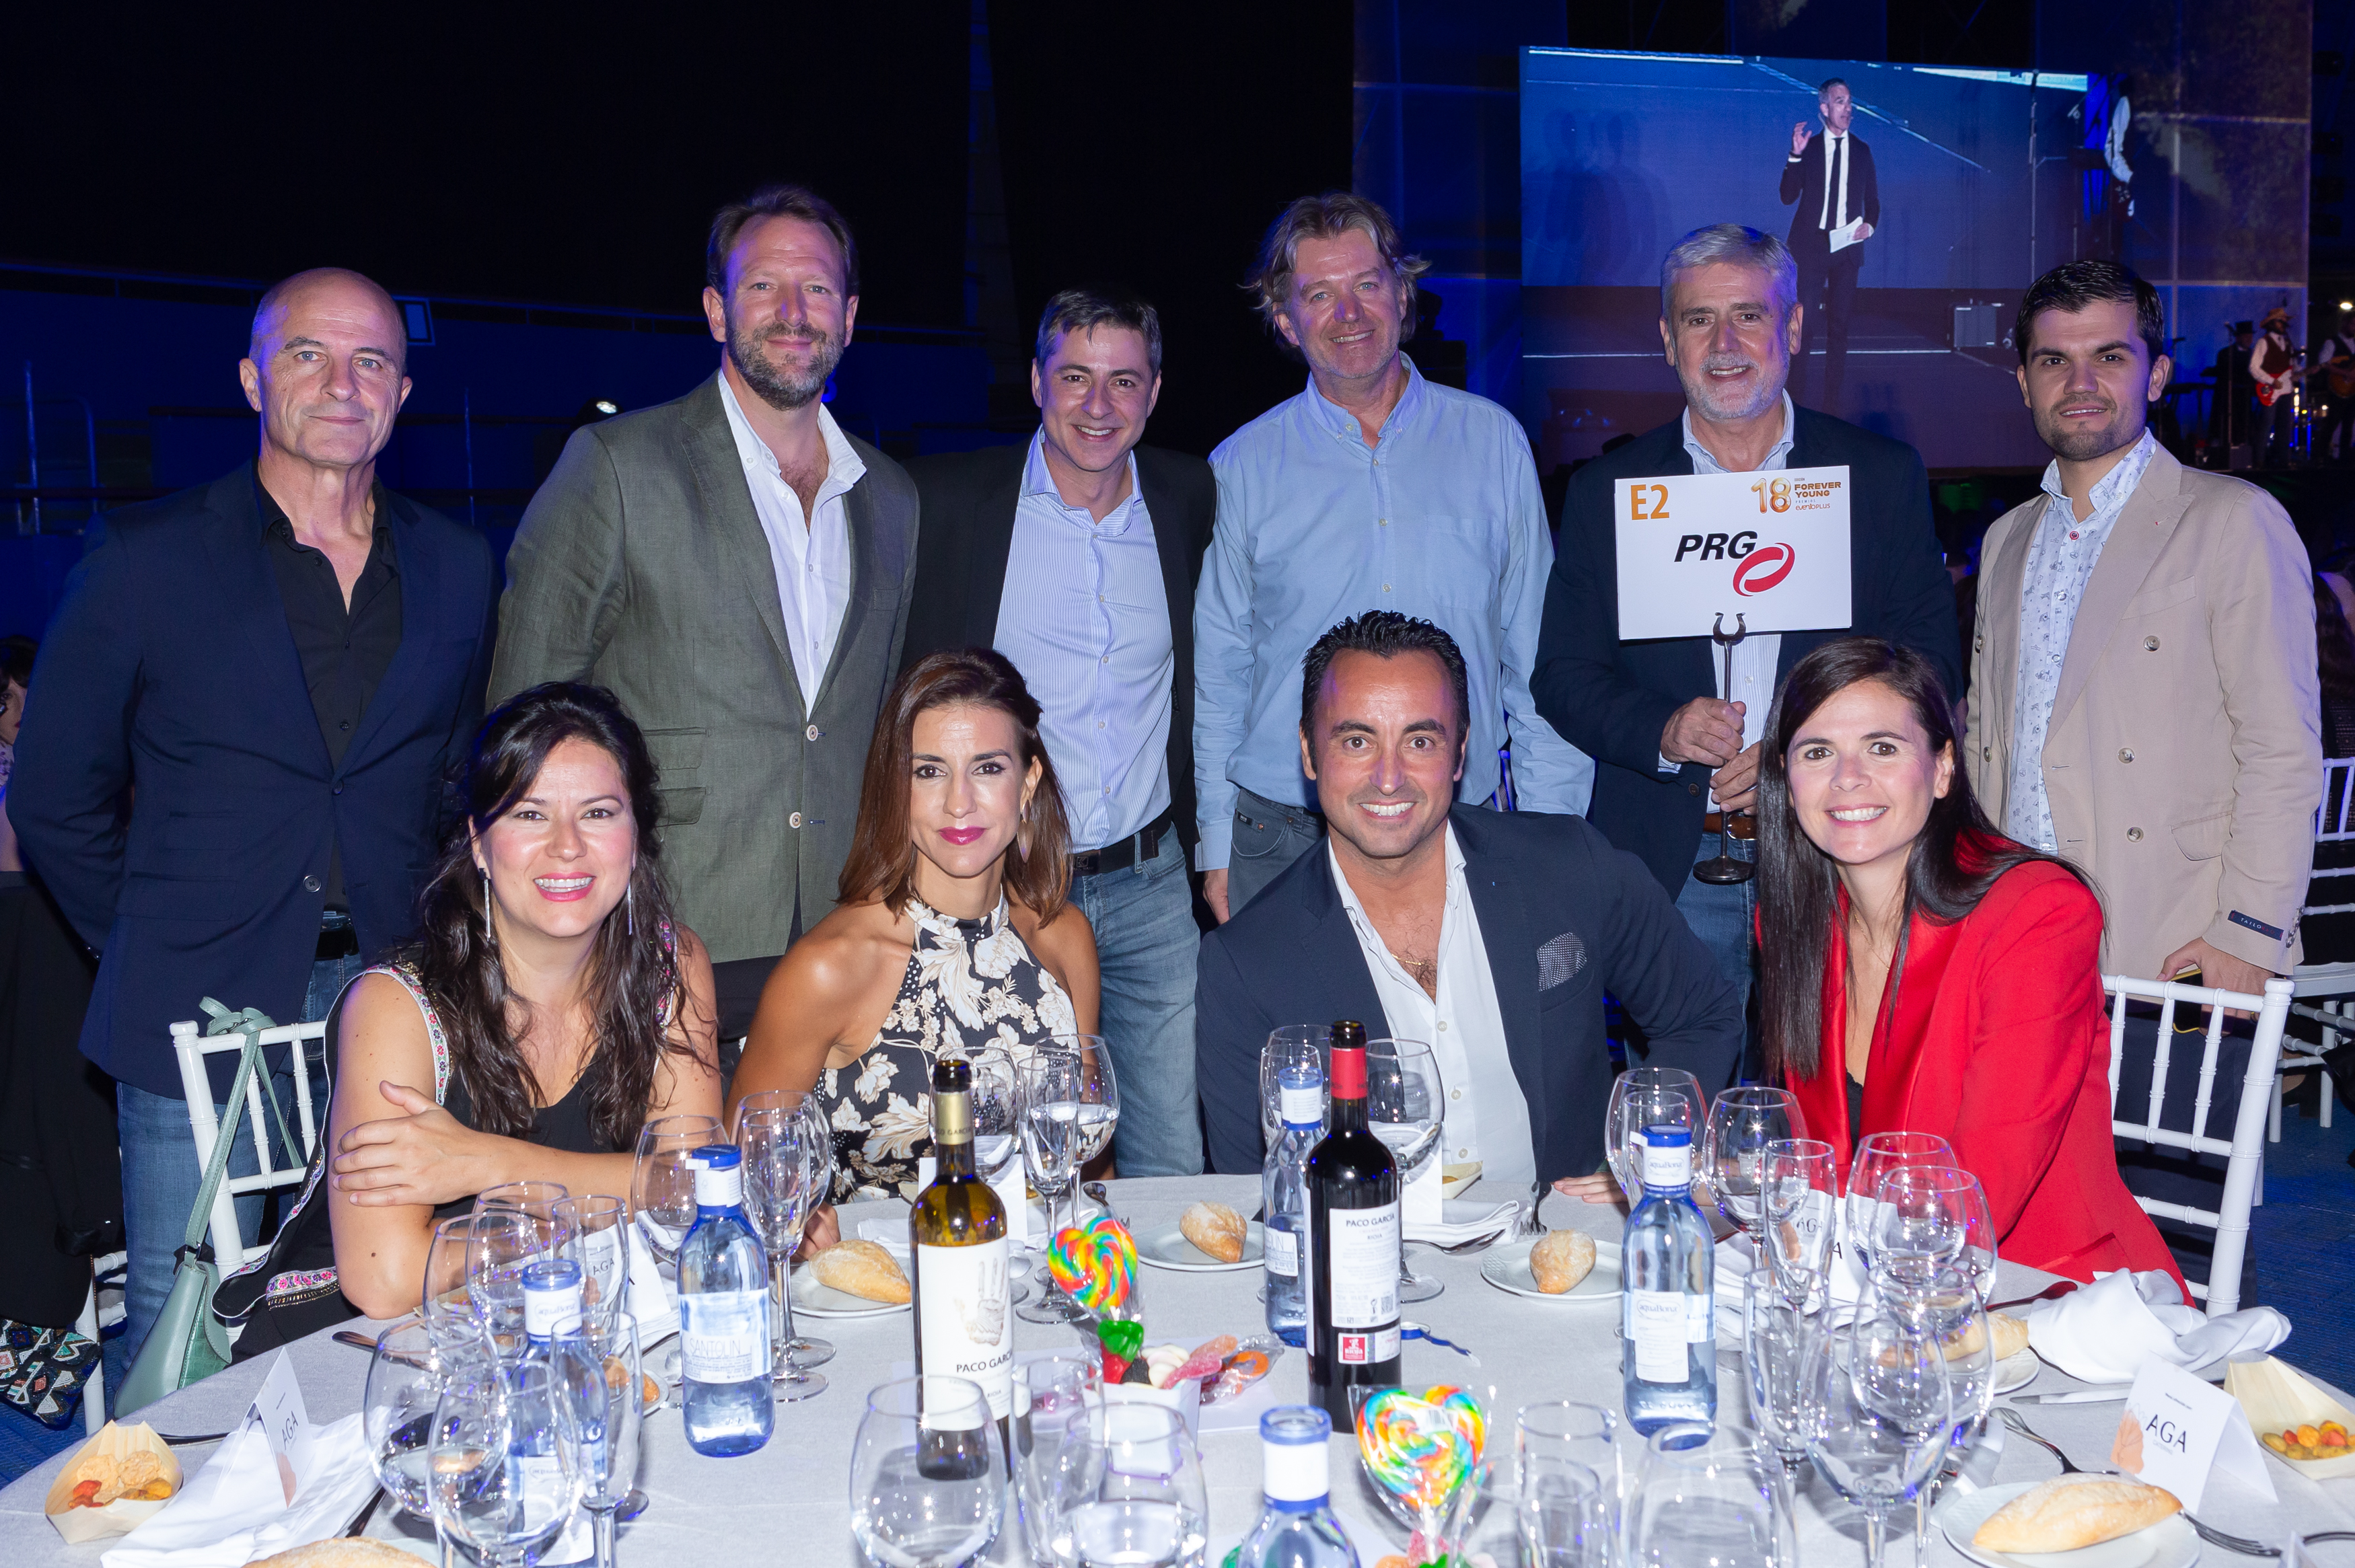 PRG España celebrates collaboration at #Eventoplus Gala, applauds #grupoeventoplus, and takes pride in award-winning projects. #PRGProud.